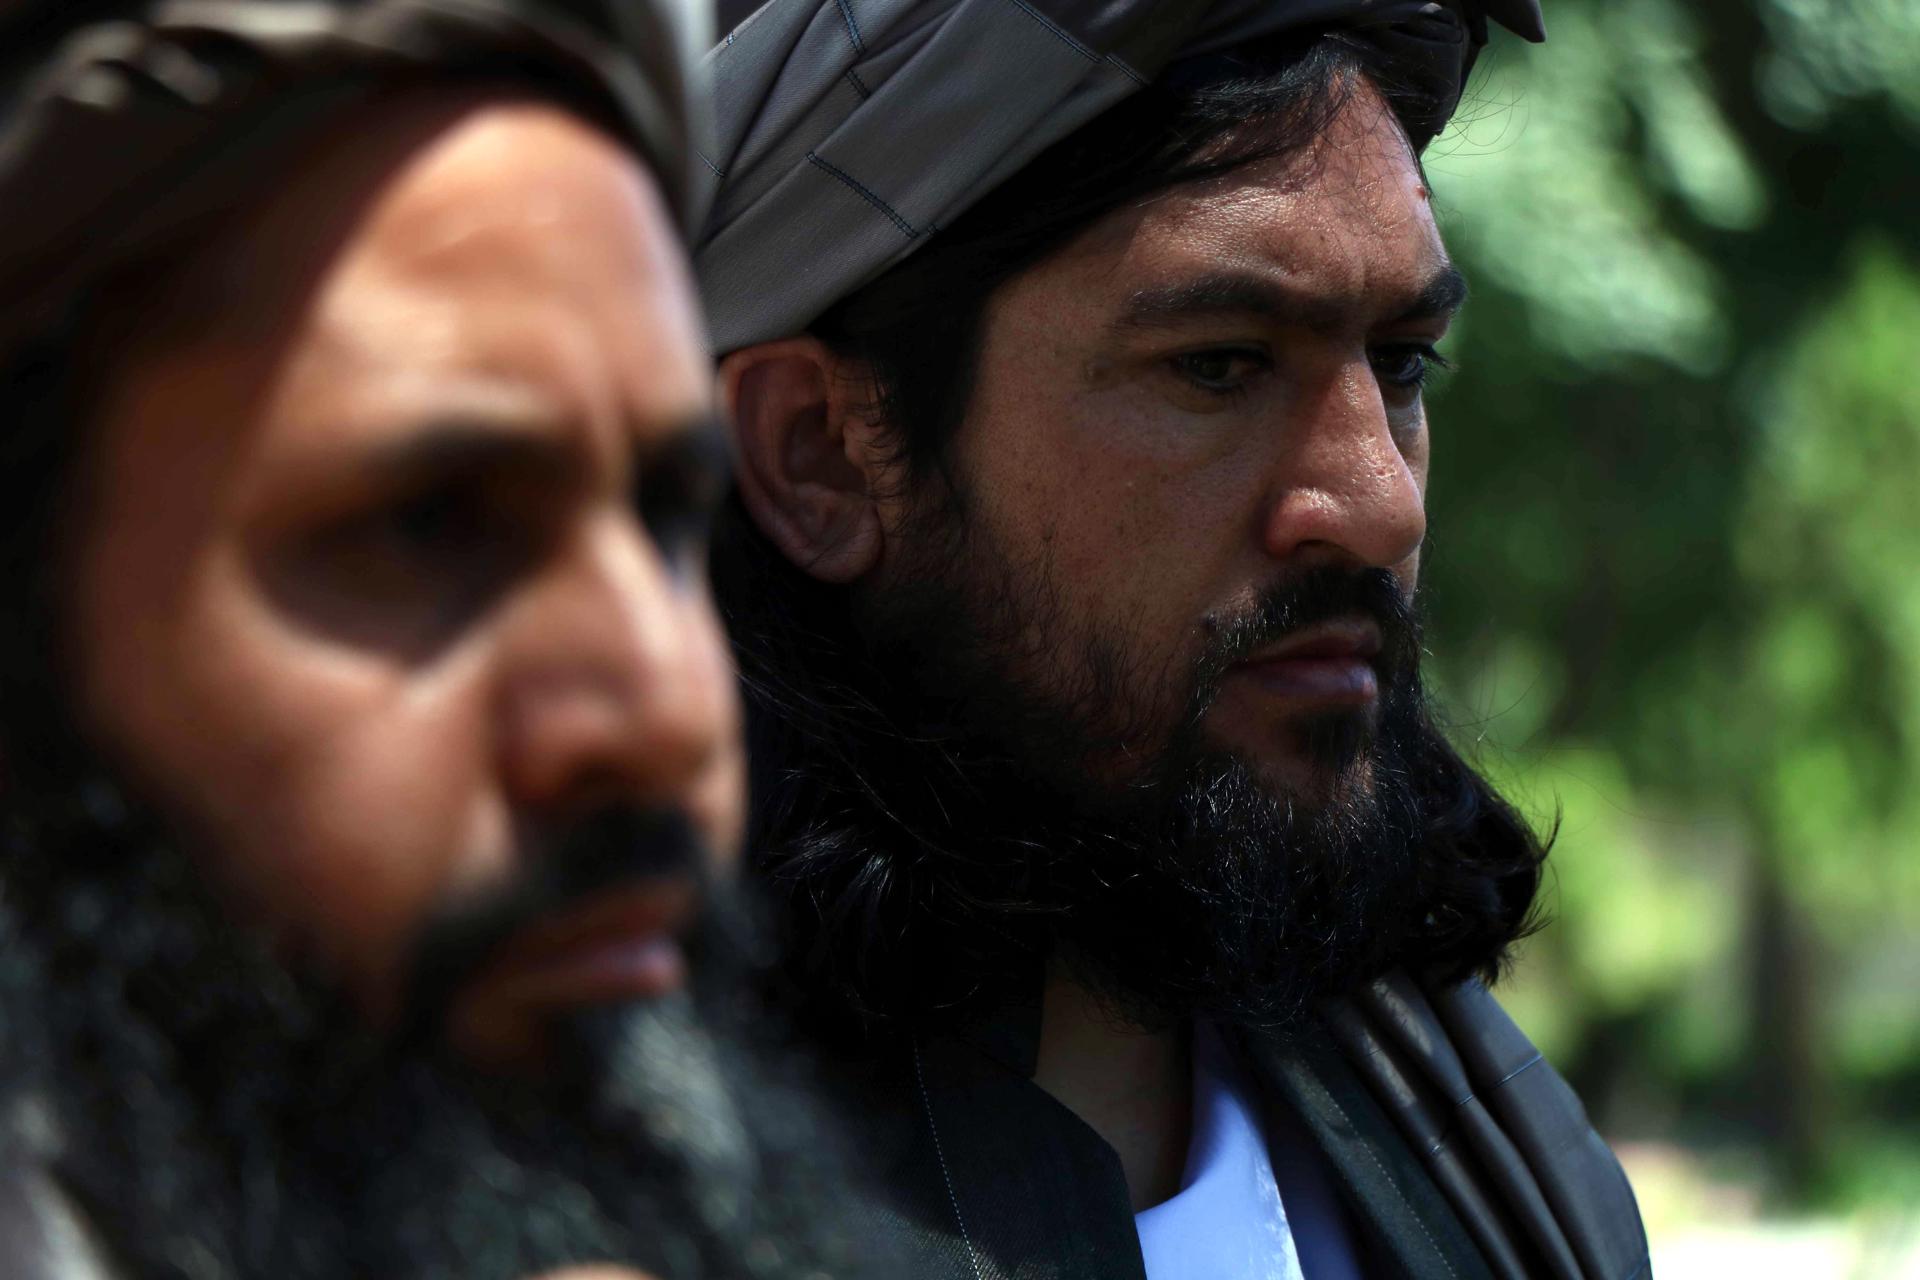 Taliban members attend a ceremony at the Governor's office after being released by authorities, in Herat, Afghanistan, 26 May 2020. EFE-EPA/FILE/JALIL REZAYEE